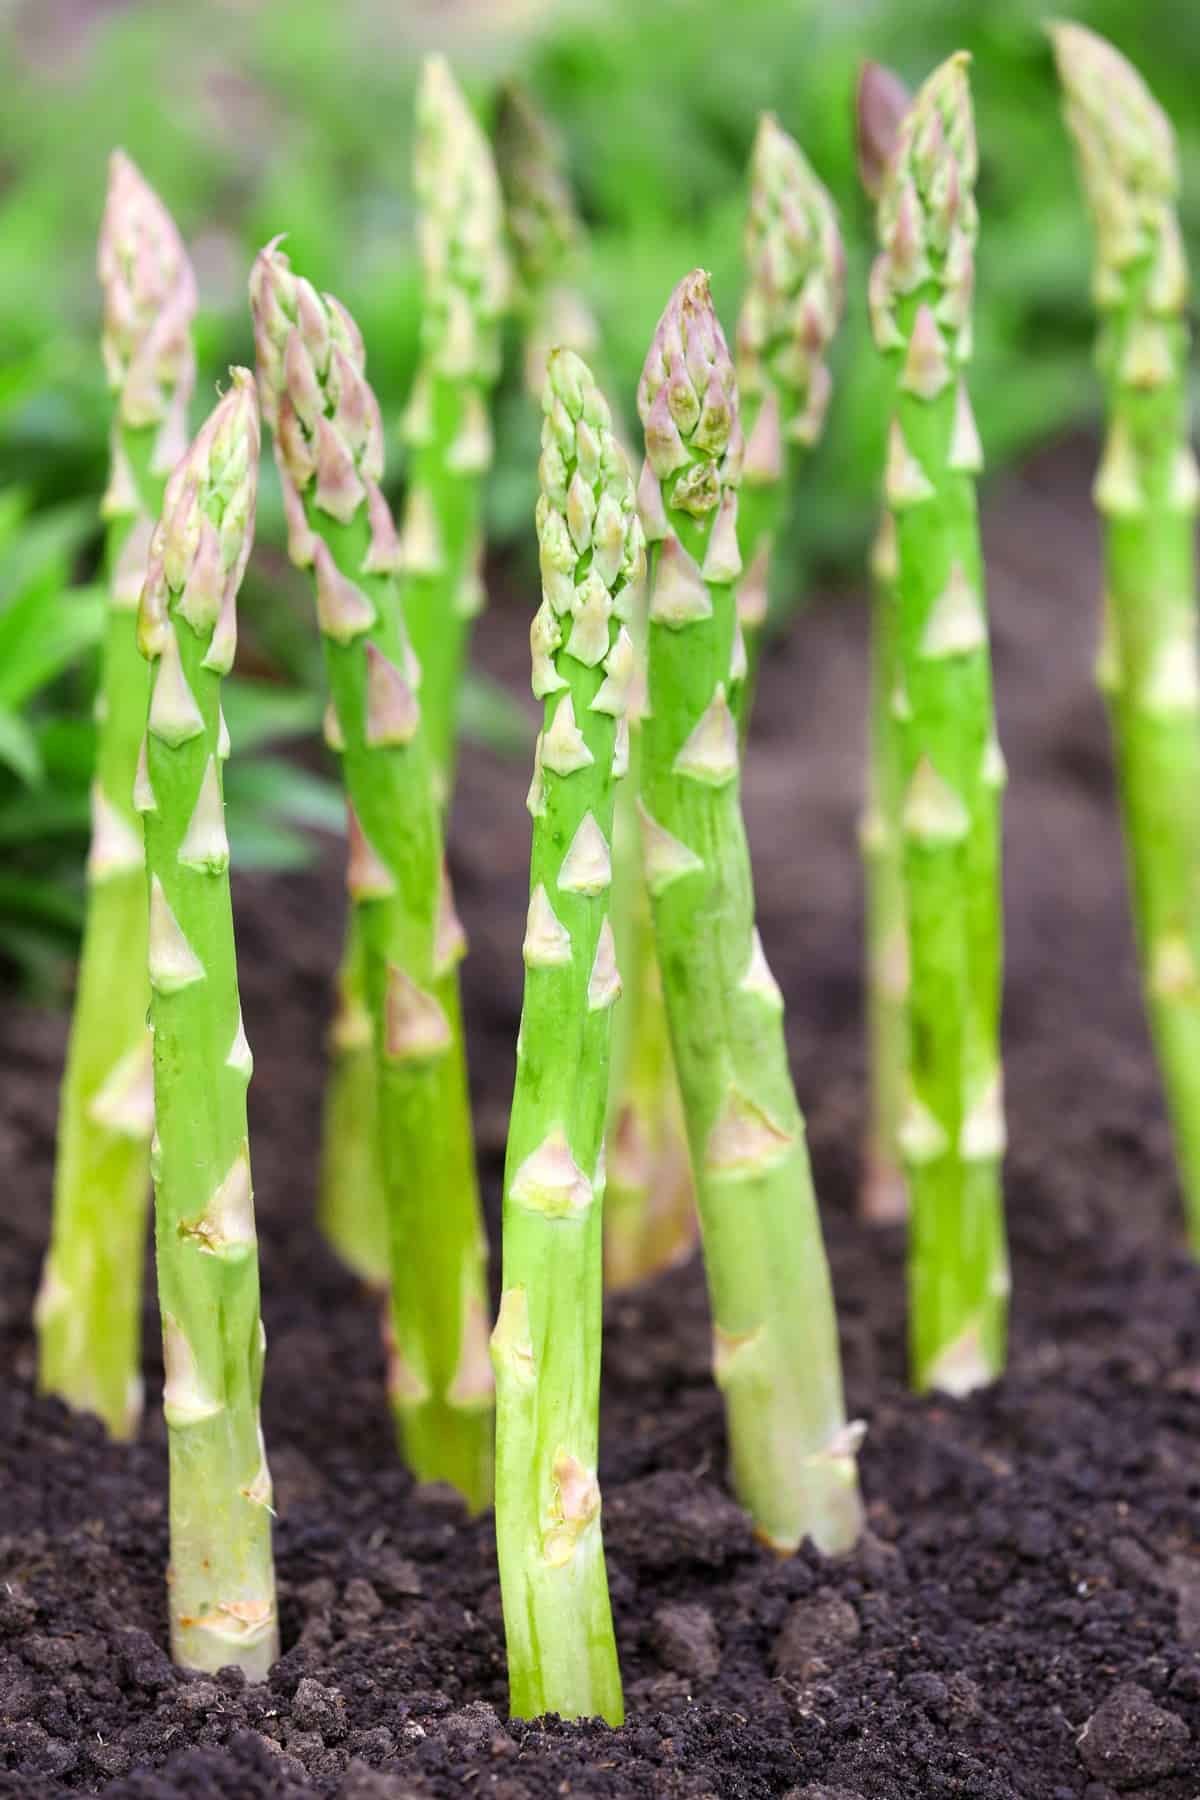 Asparagus spears growing out of the dirt.